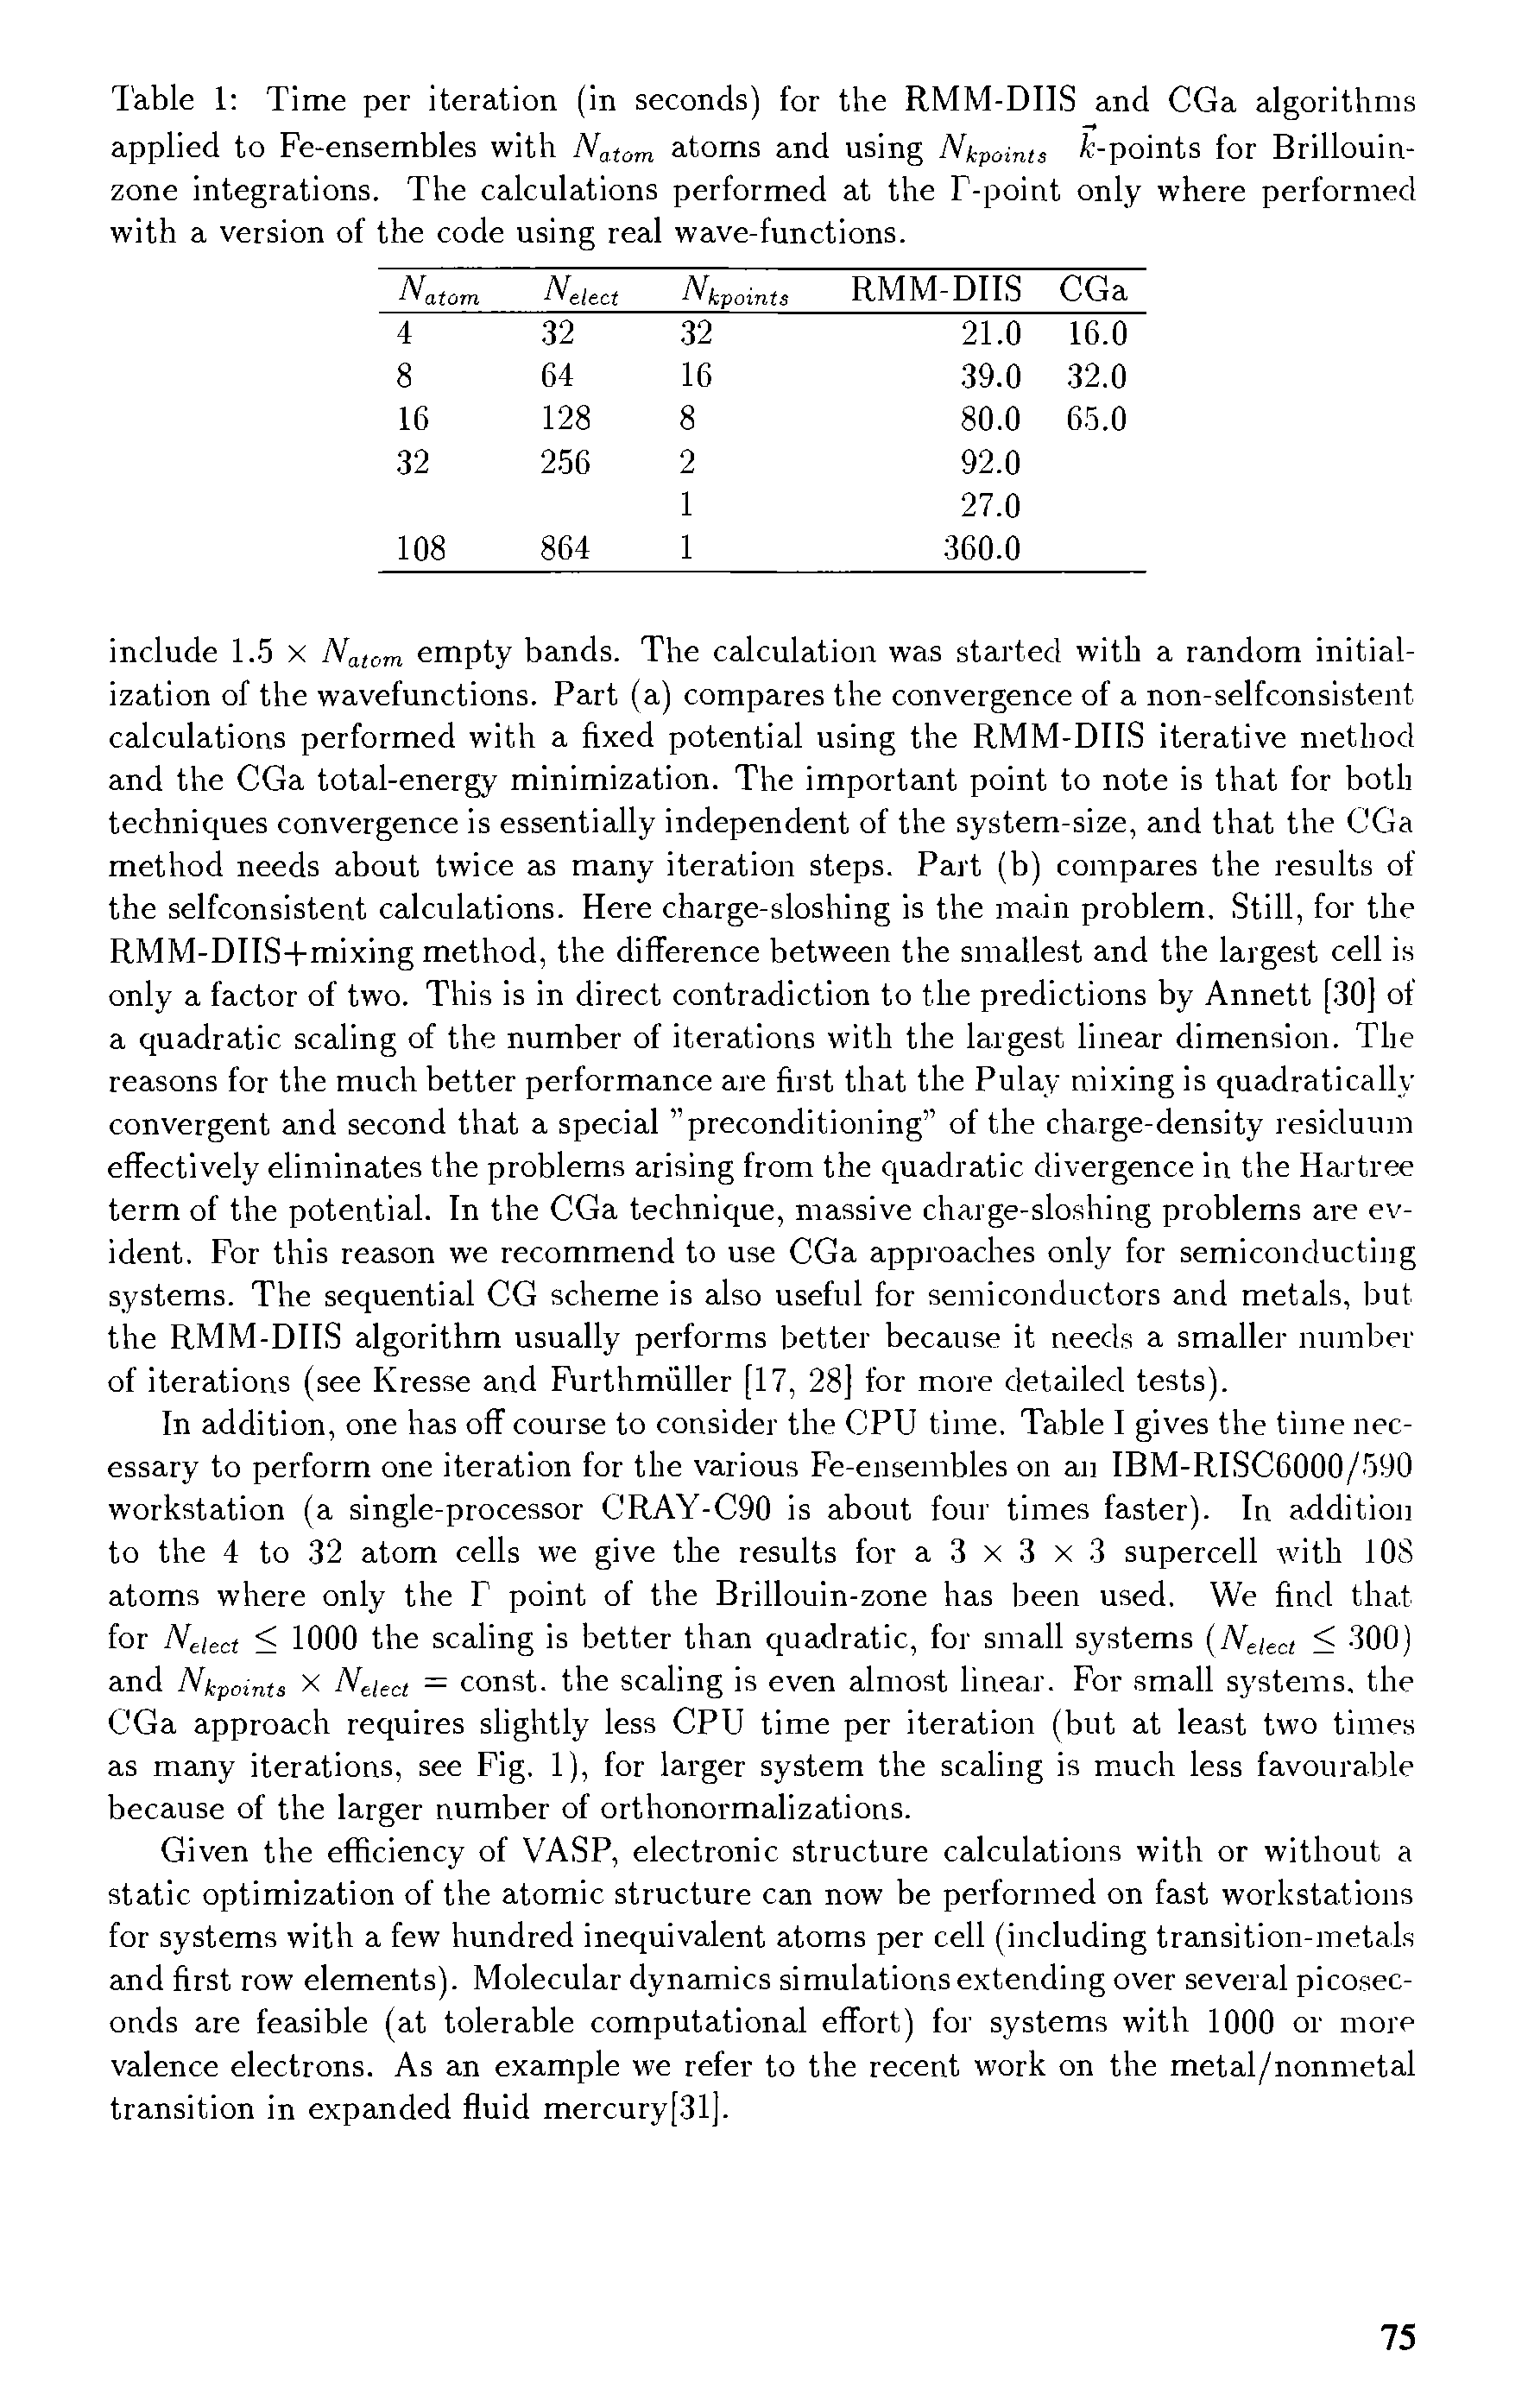 Table 1 Time per iteration (in seconds) for the RMM-DIIS and CGa algorithms applied to Fe-ensembles with Natom atoms and using Nkpointa -points for Brillouin-zone integrations. The calculations performed at the T-point only where performed with a version of the code using real wave-functions.